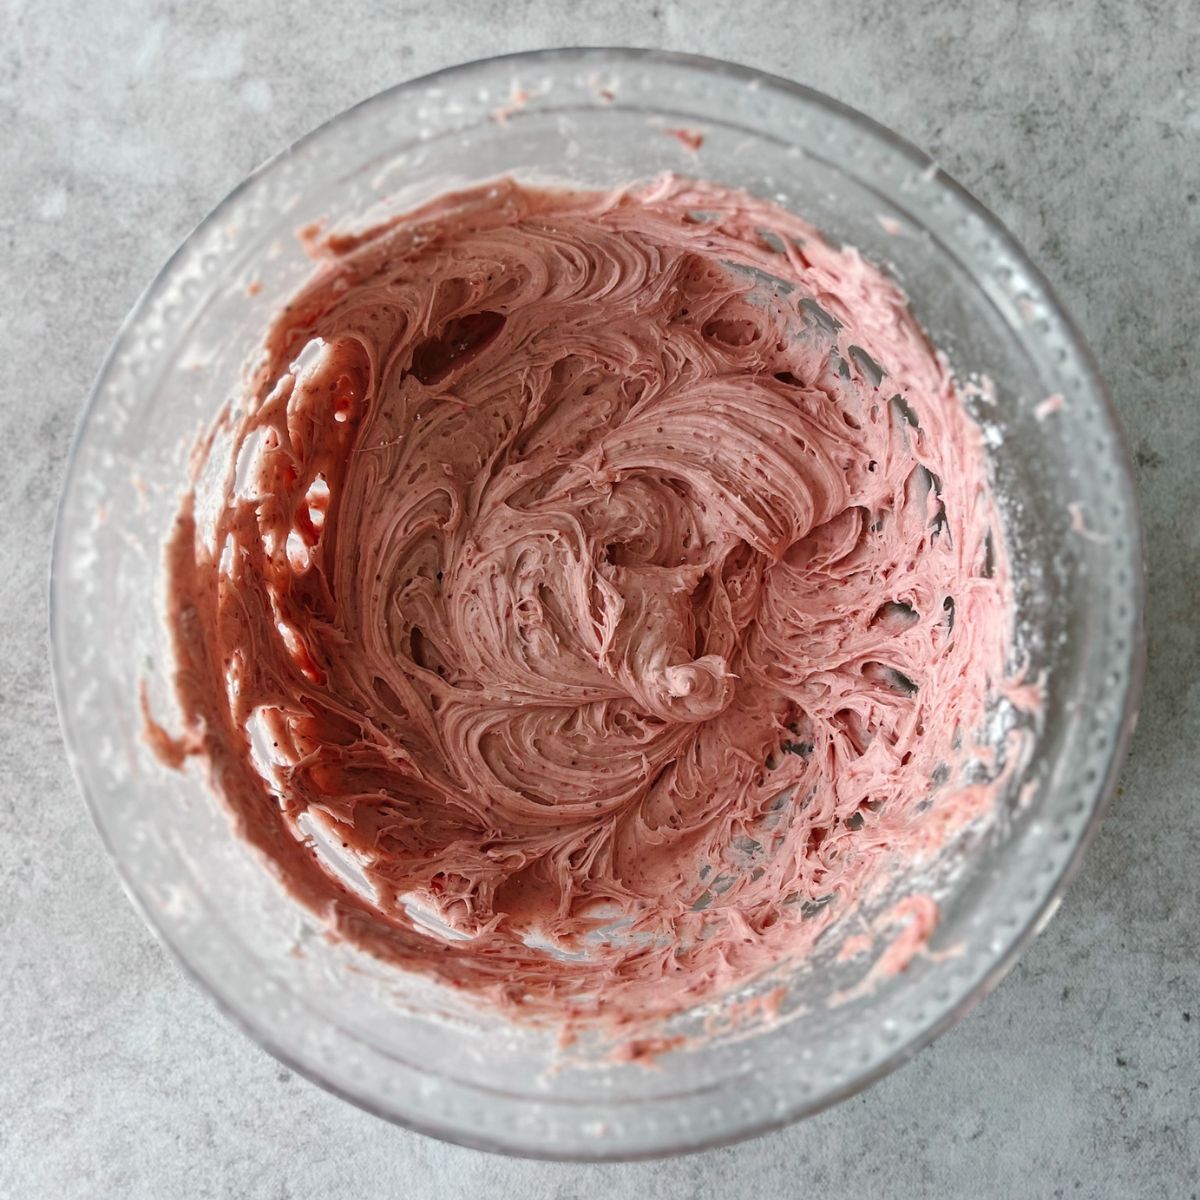 Strawberry cream cheese frosting in a mixing bowl.